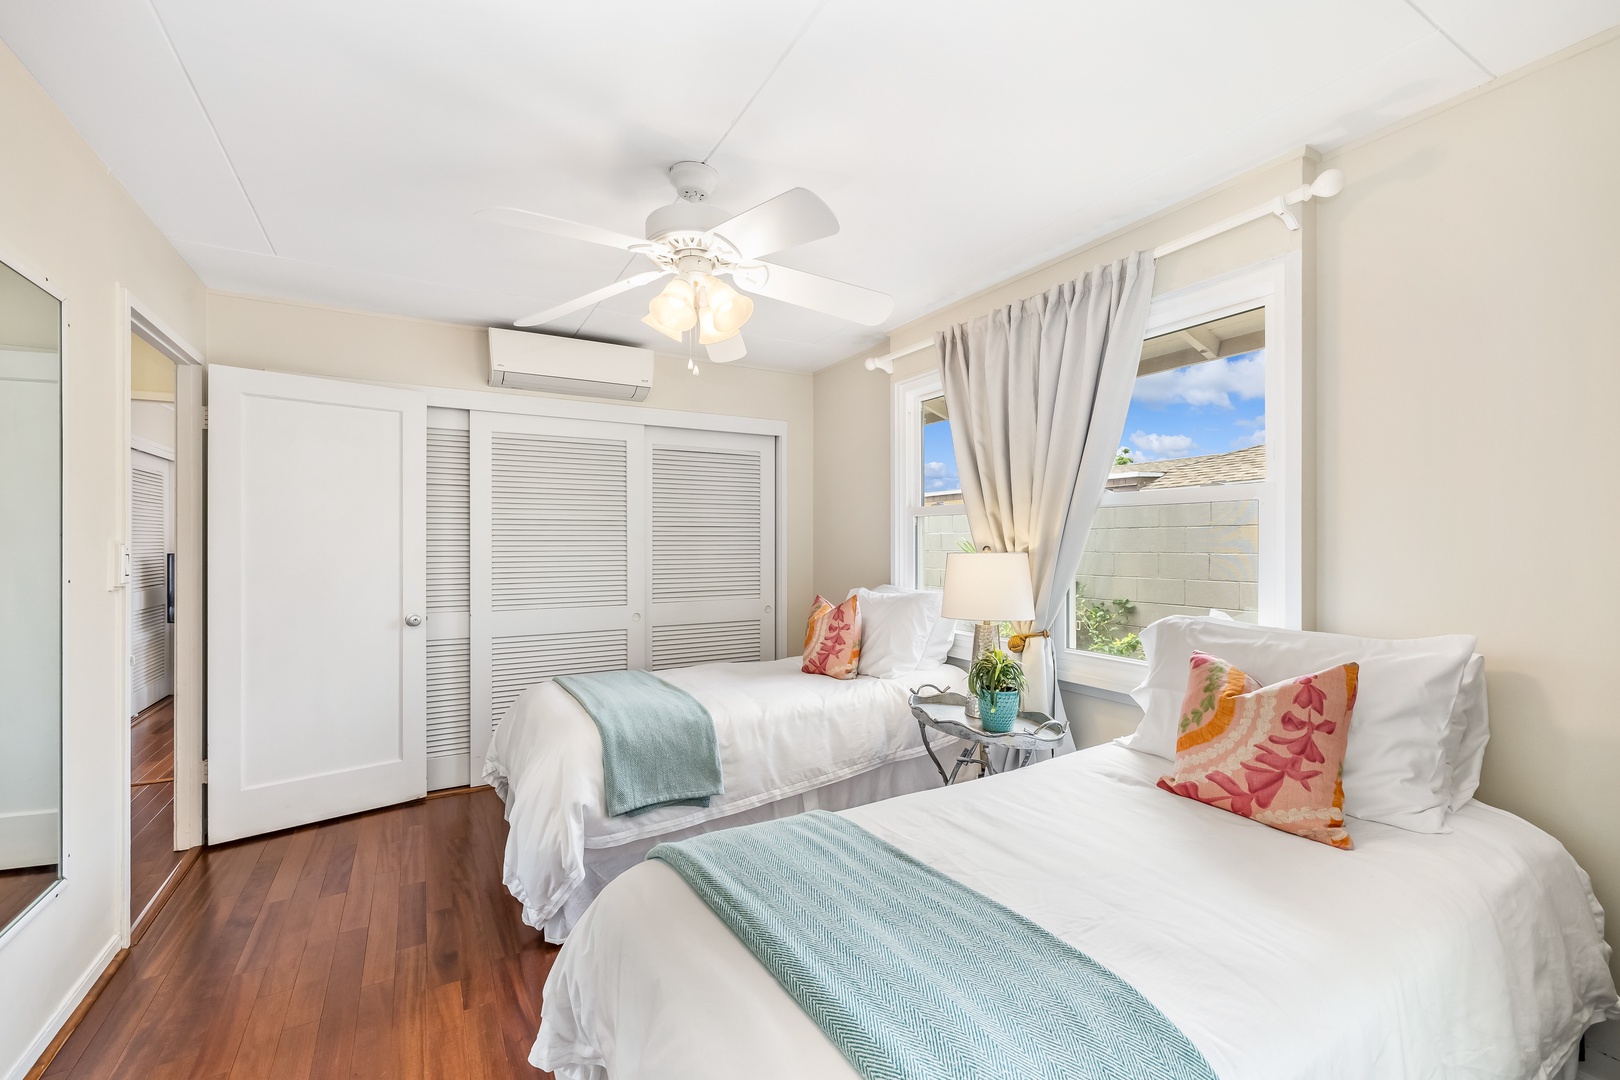 Honolulu Vacation Rentals, Kahala Cottage - The guest bedroom features two twin beds and split AC.